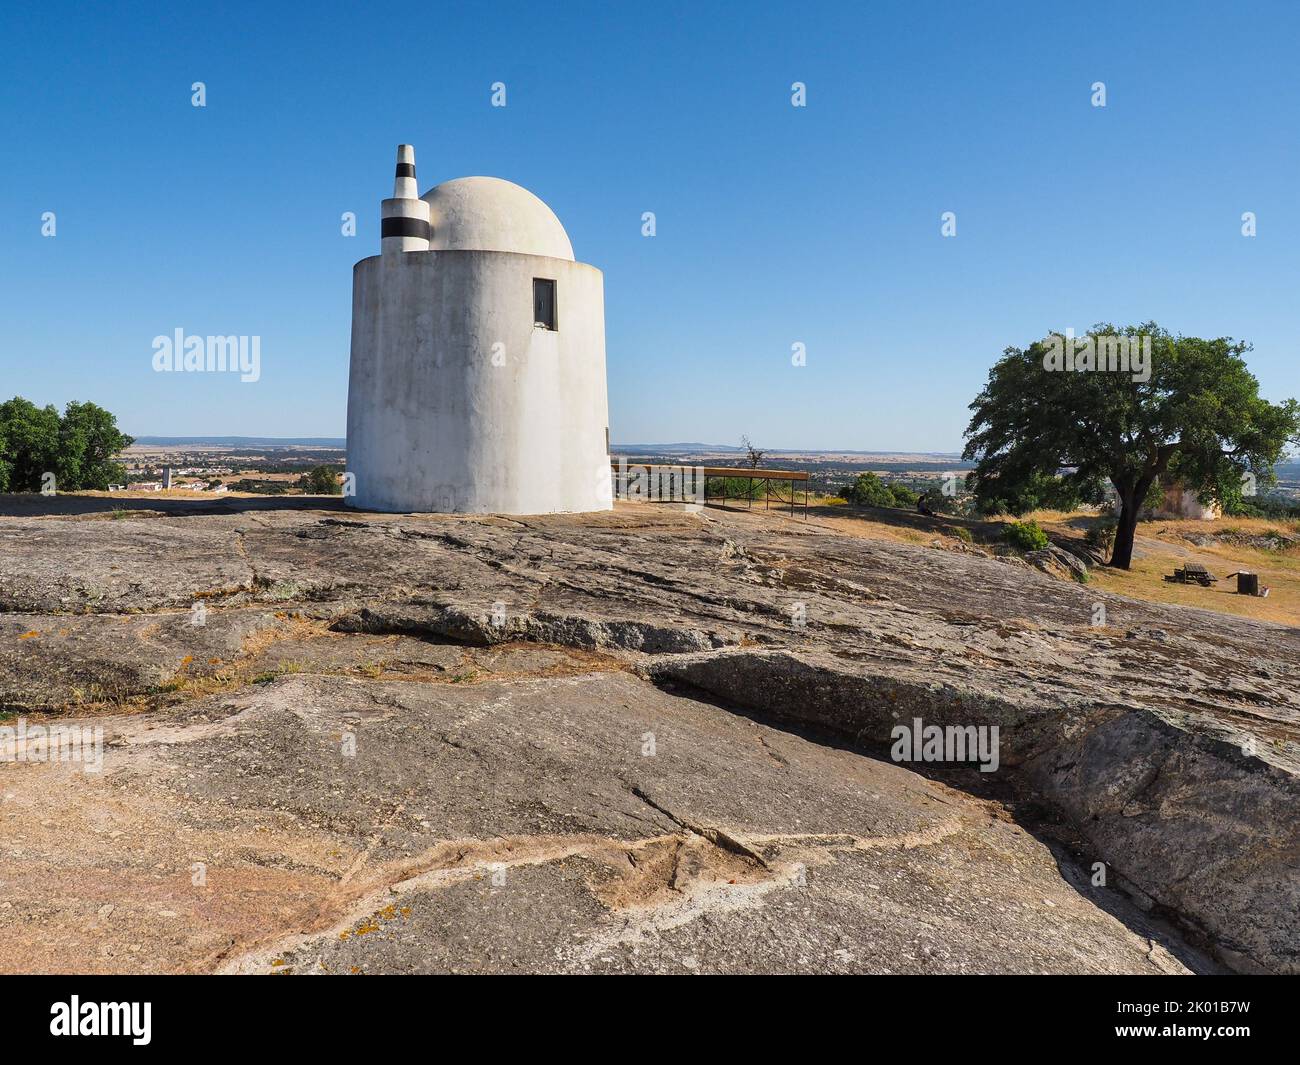 Well-preserved old windmill Alto de São Bento. White cylindrical building, built on a hill near the town of Evora on a large block of granite stone. Stock Photo